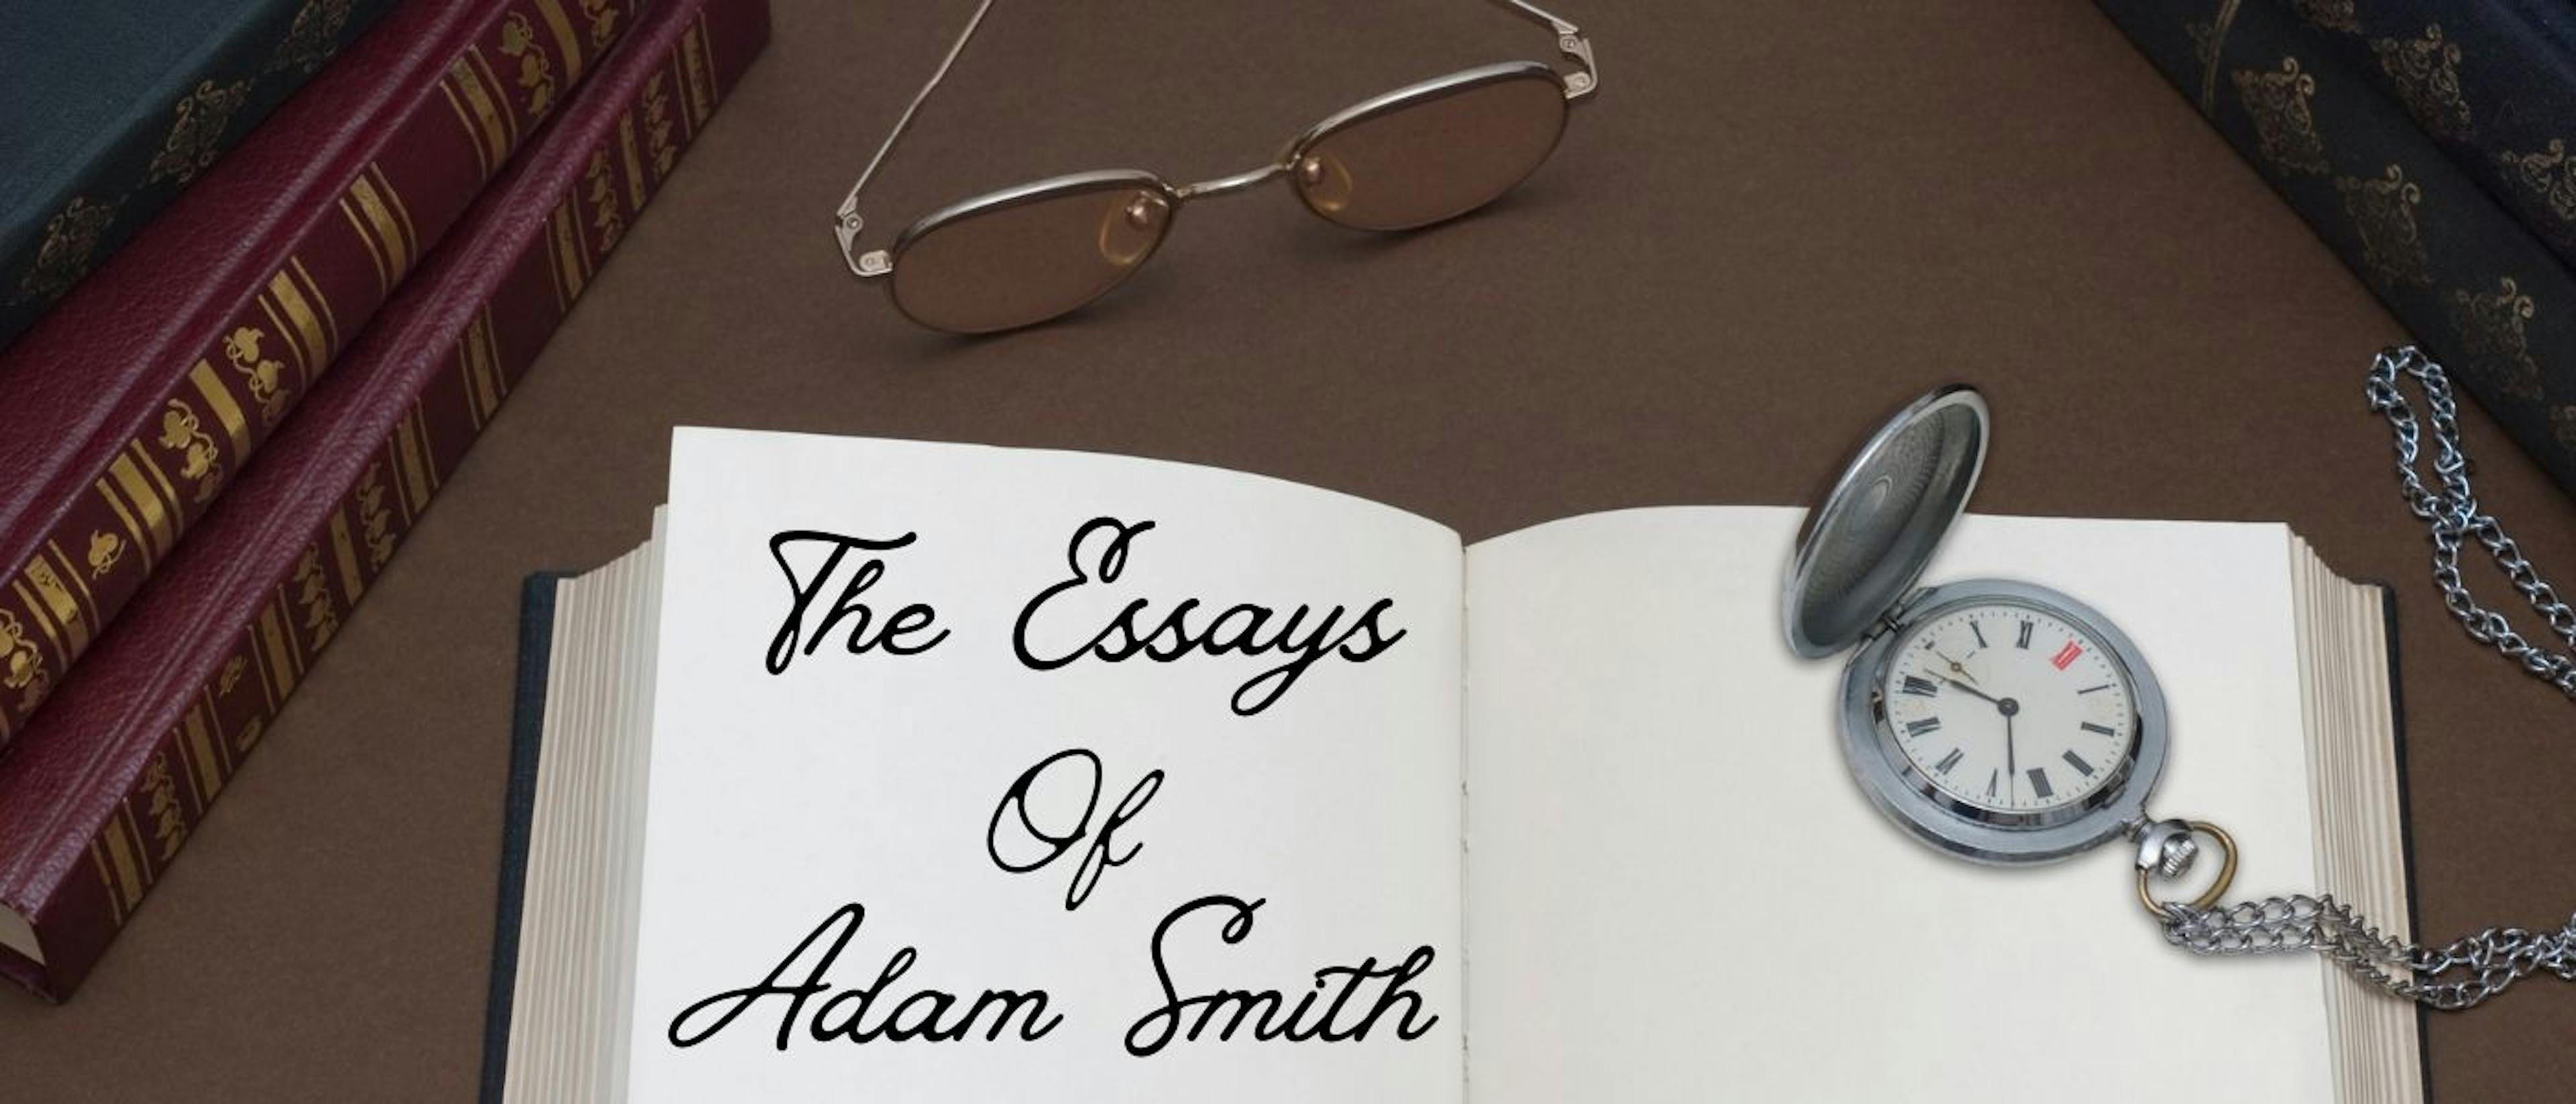 featured image - The Essays of Adam Smith: Part VII: Of Systems of Moral Philosophy, Section I